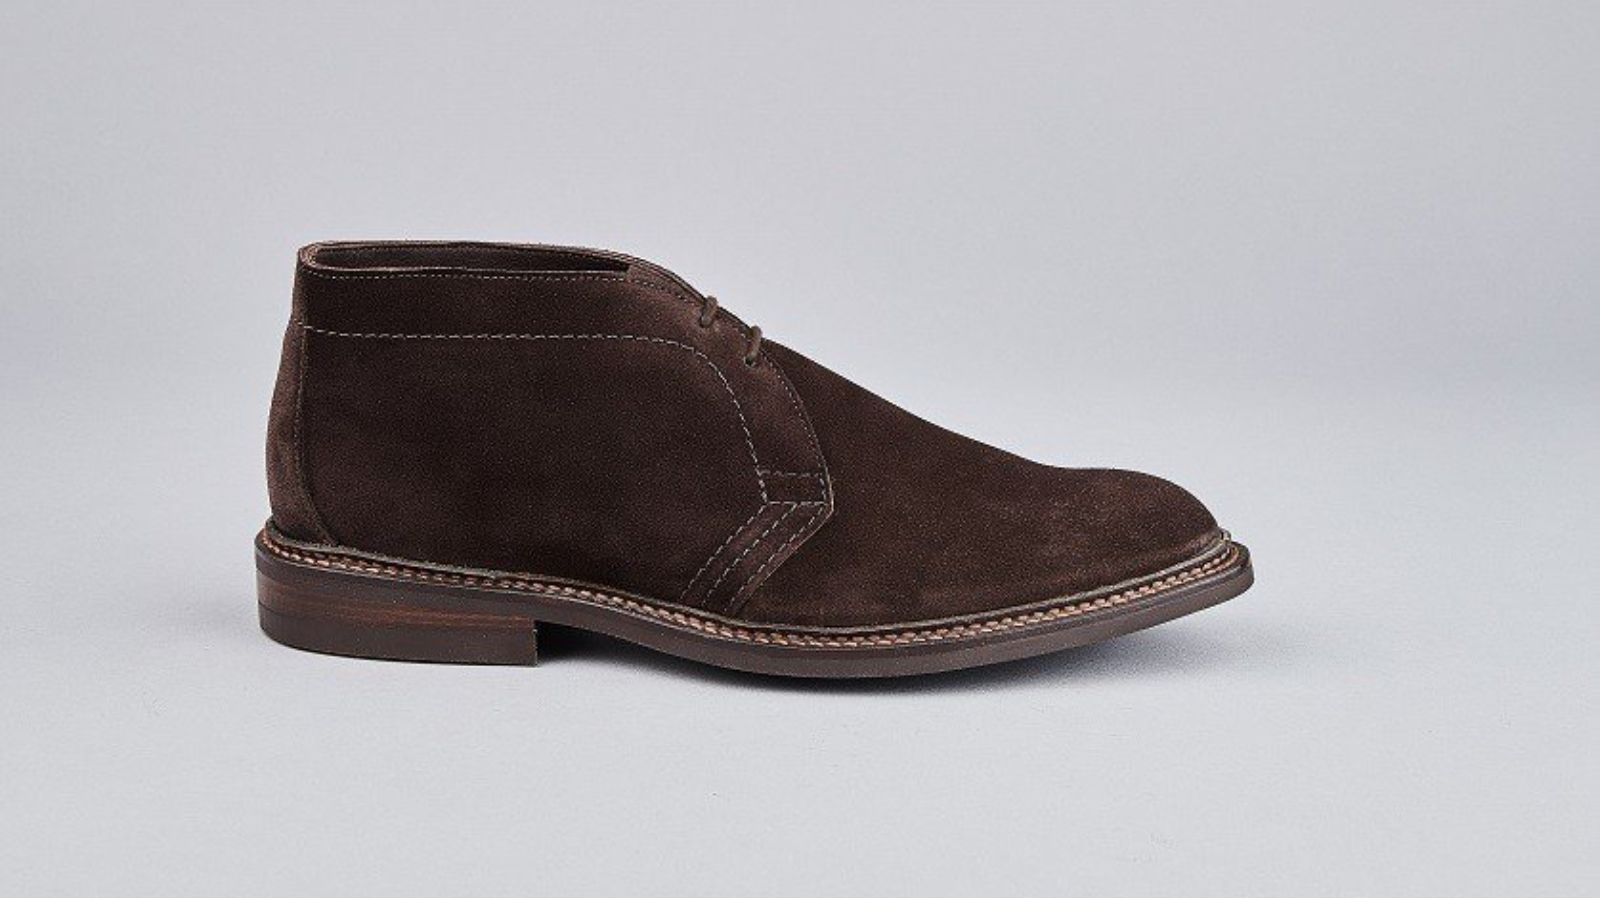 16 Best Chukkas for Men - Dress up Those Jeans and Chinos